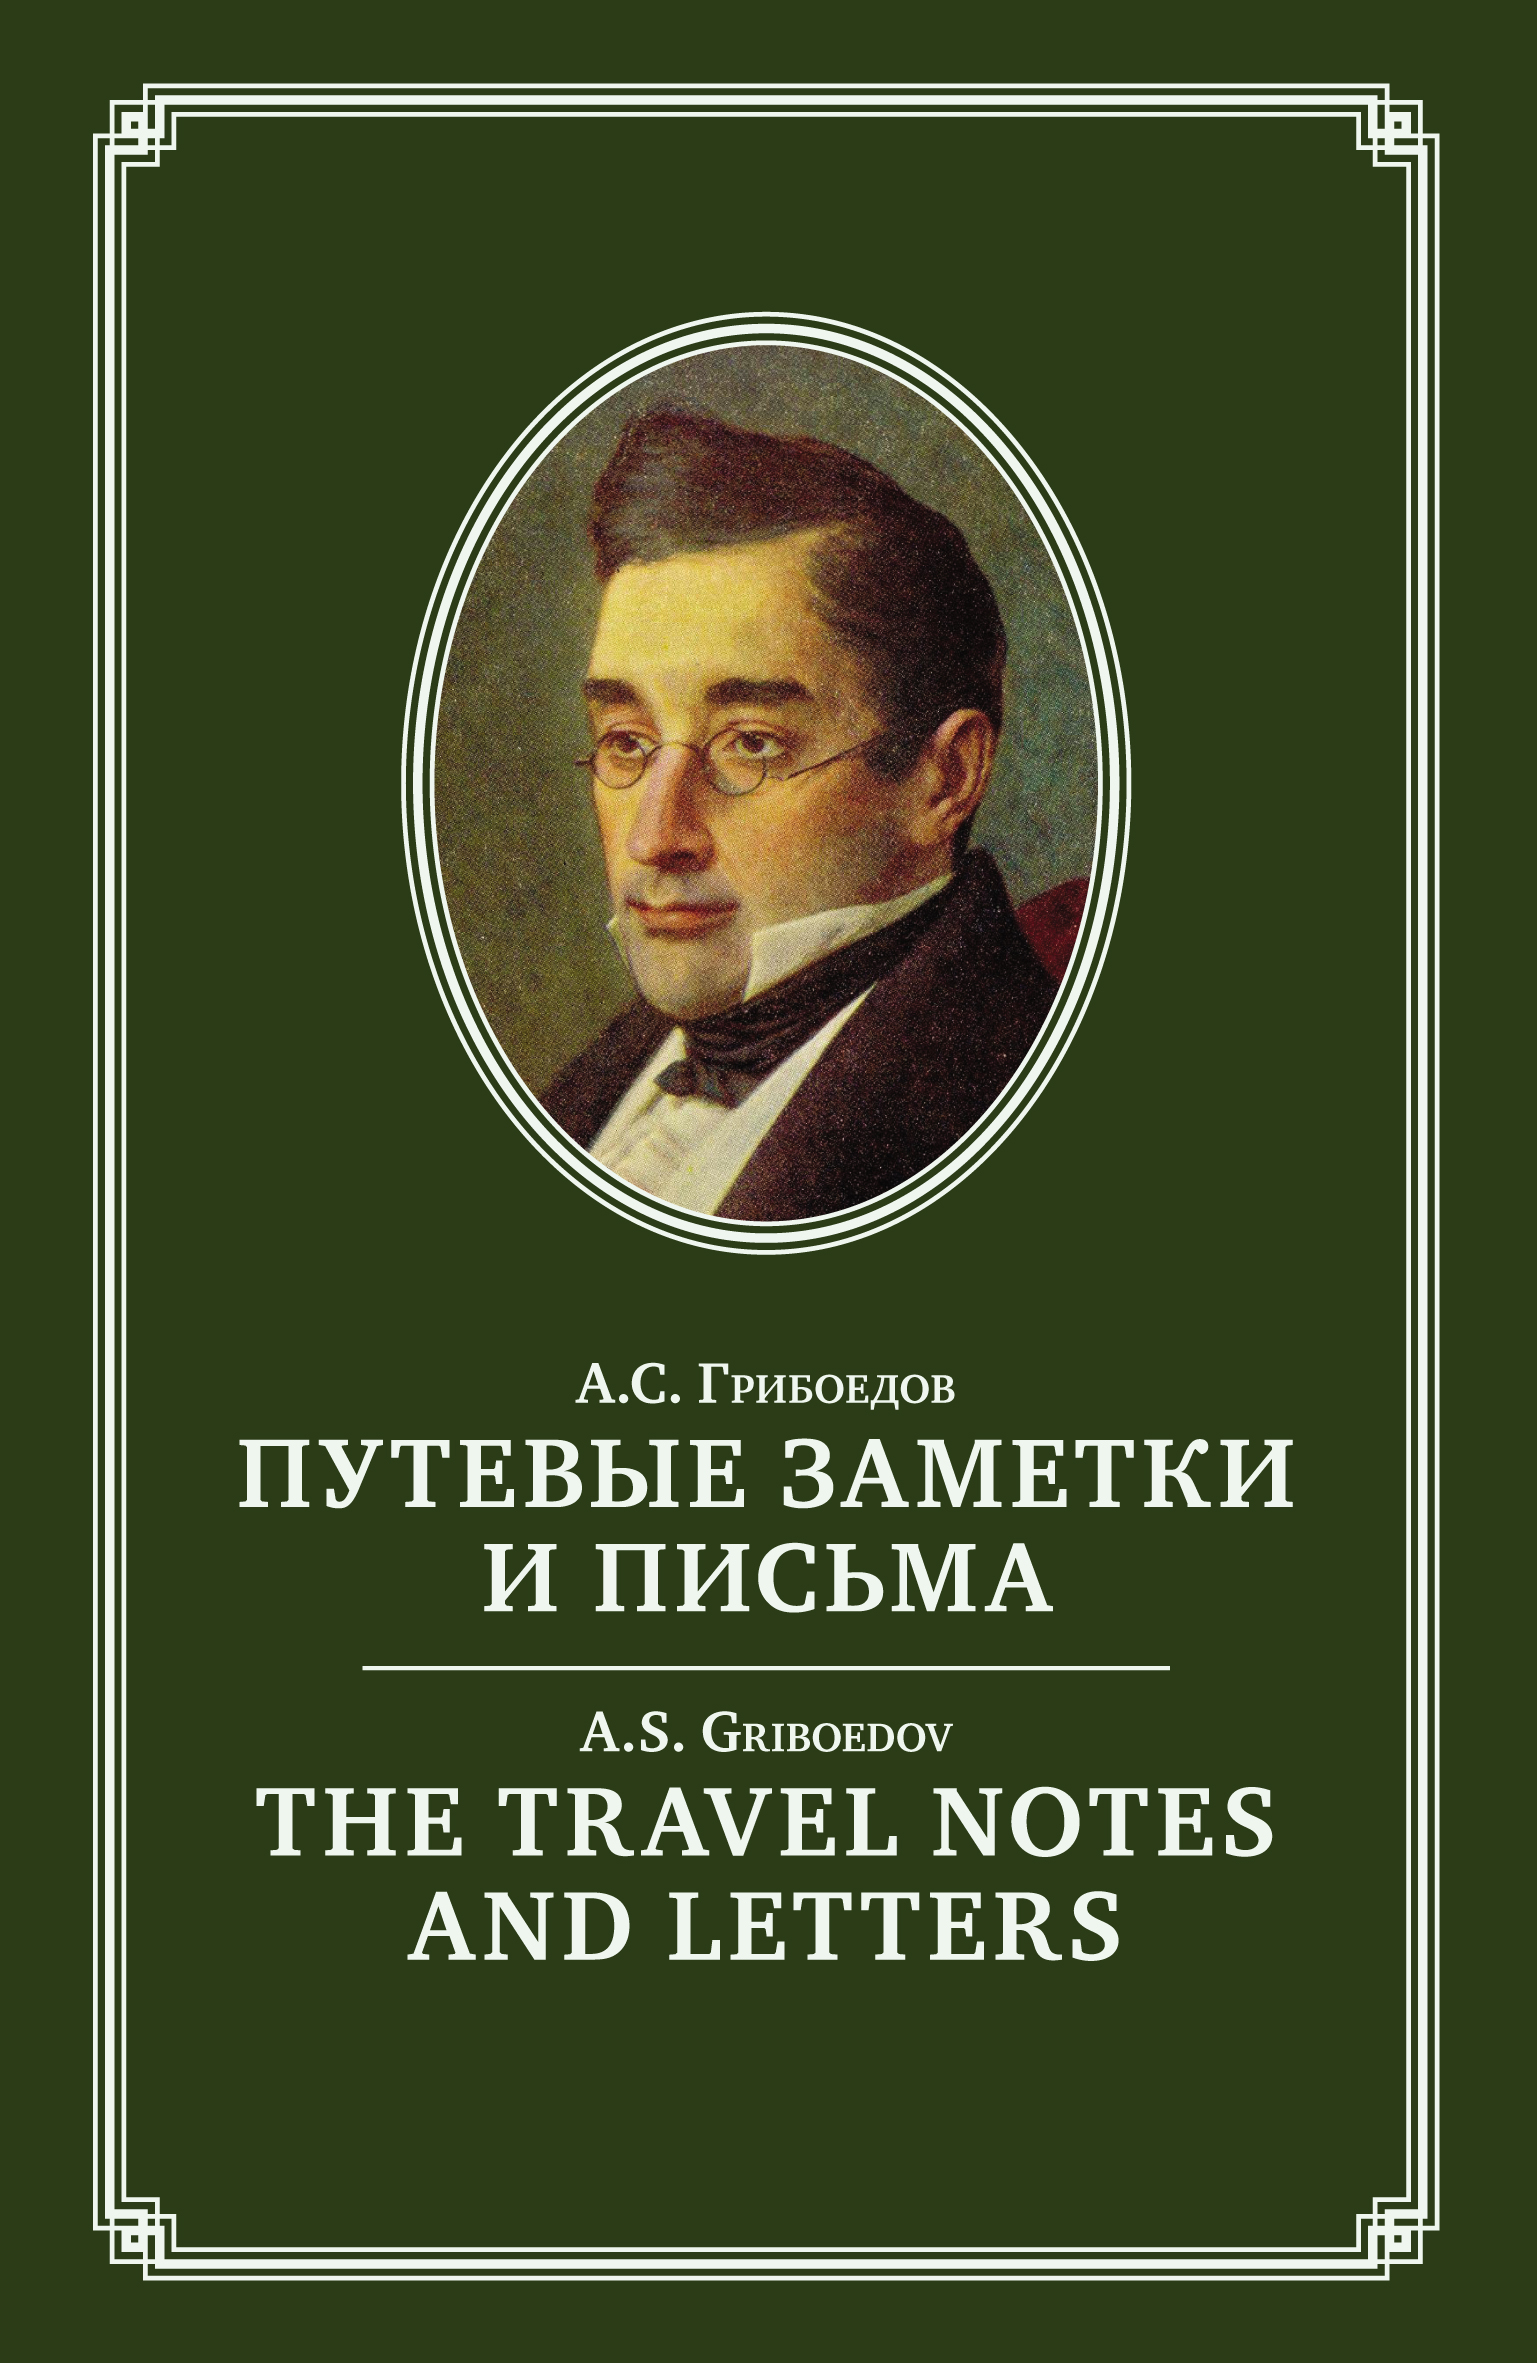 The Travel Notes And Letters /Путевые заметки и письма